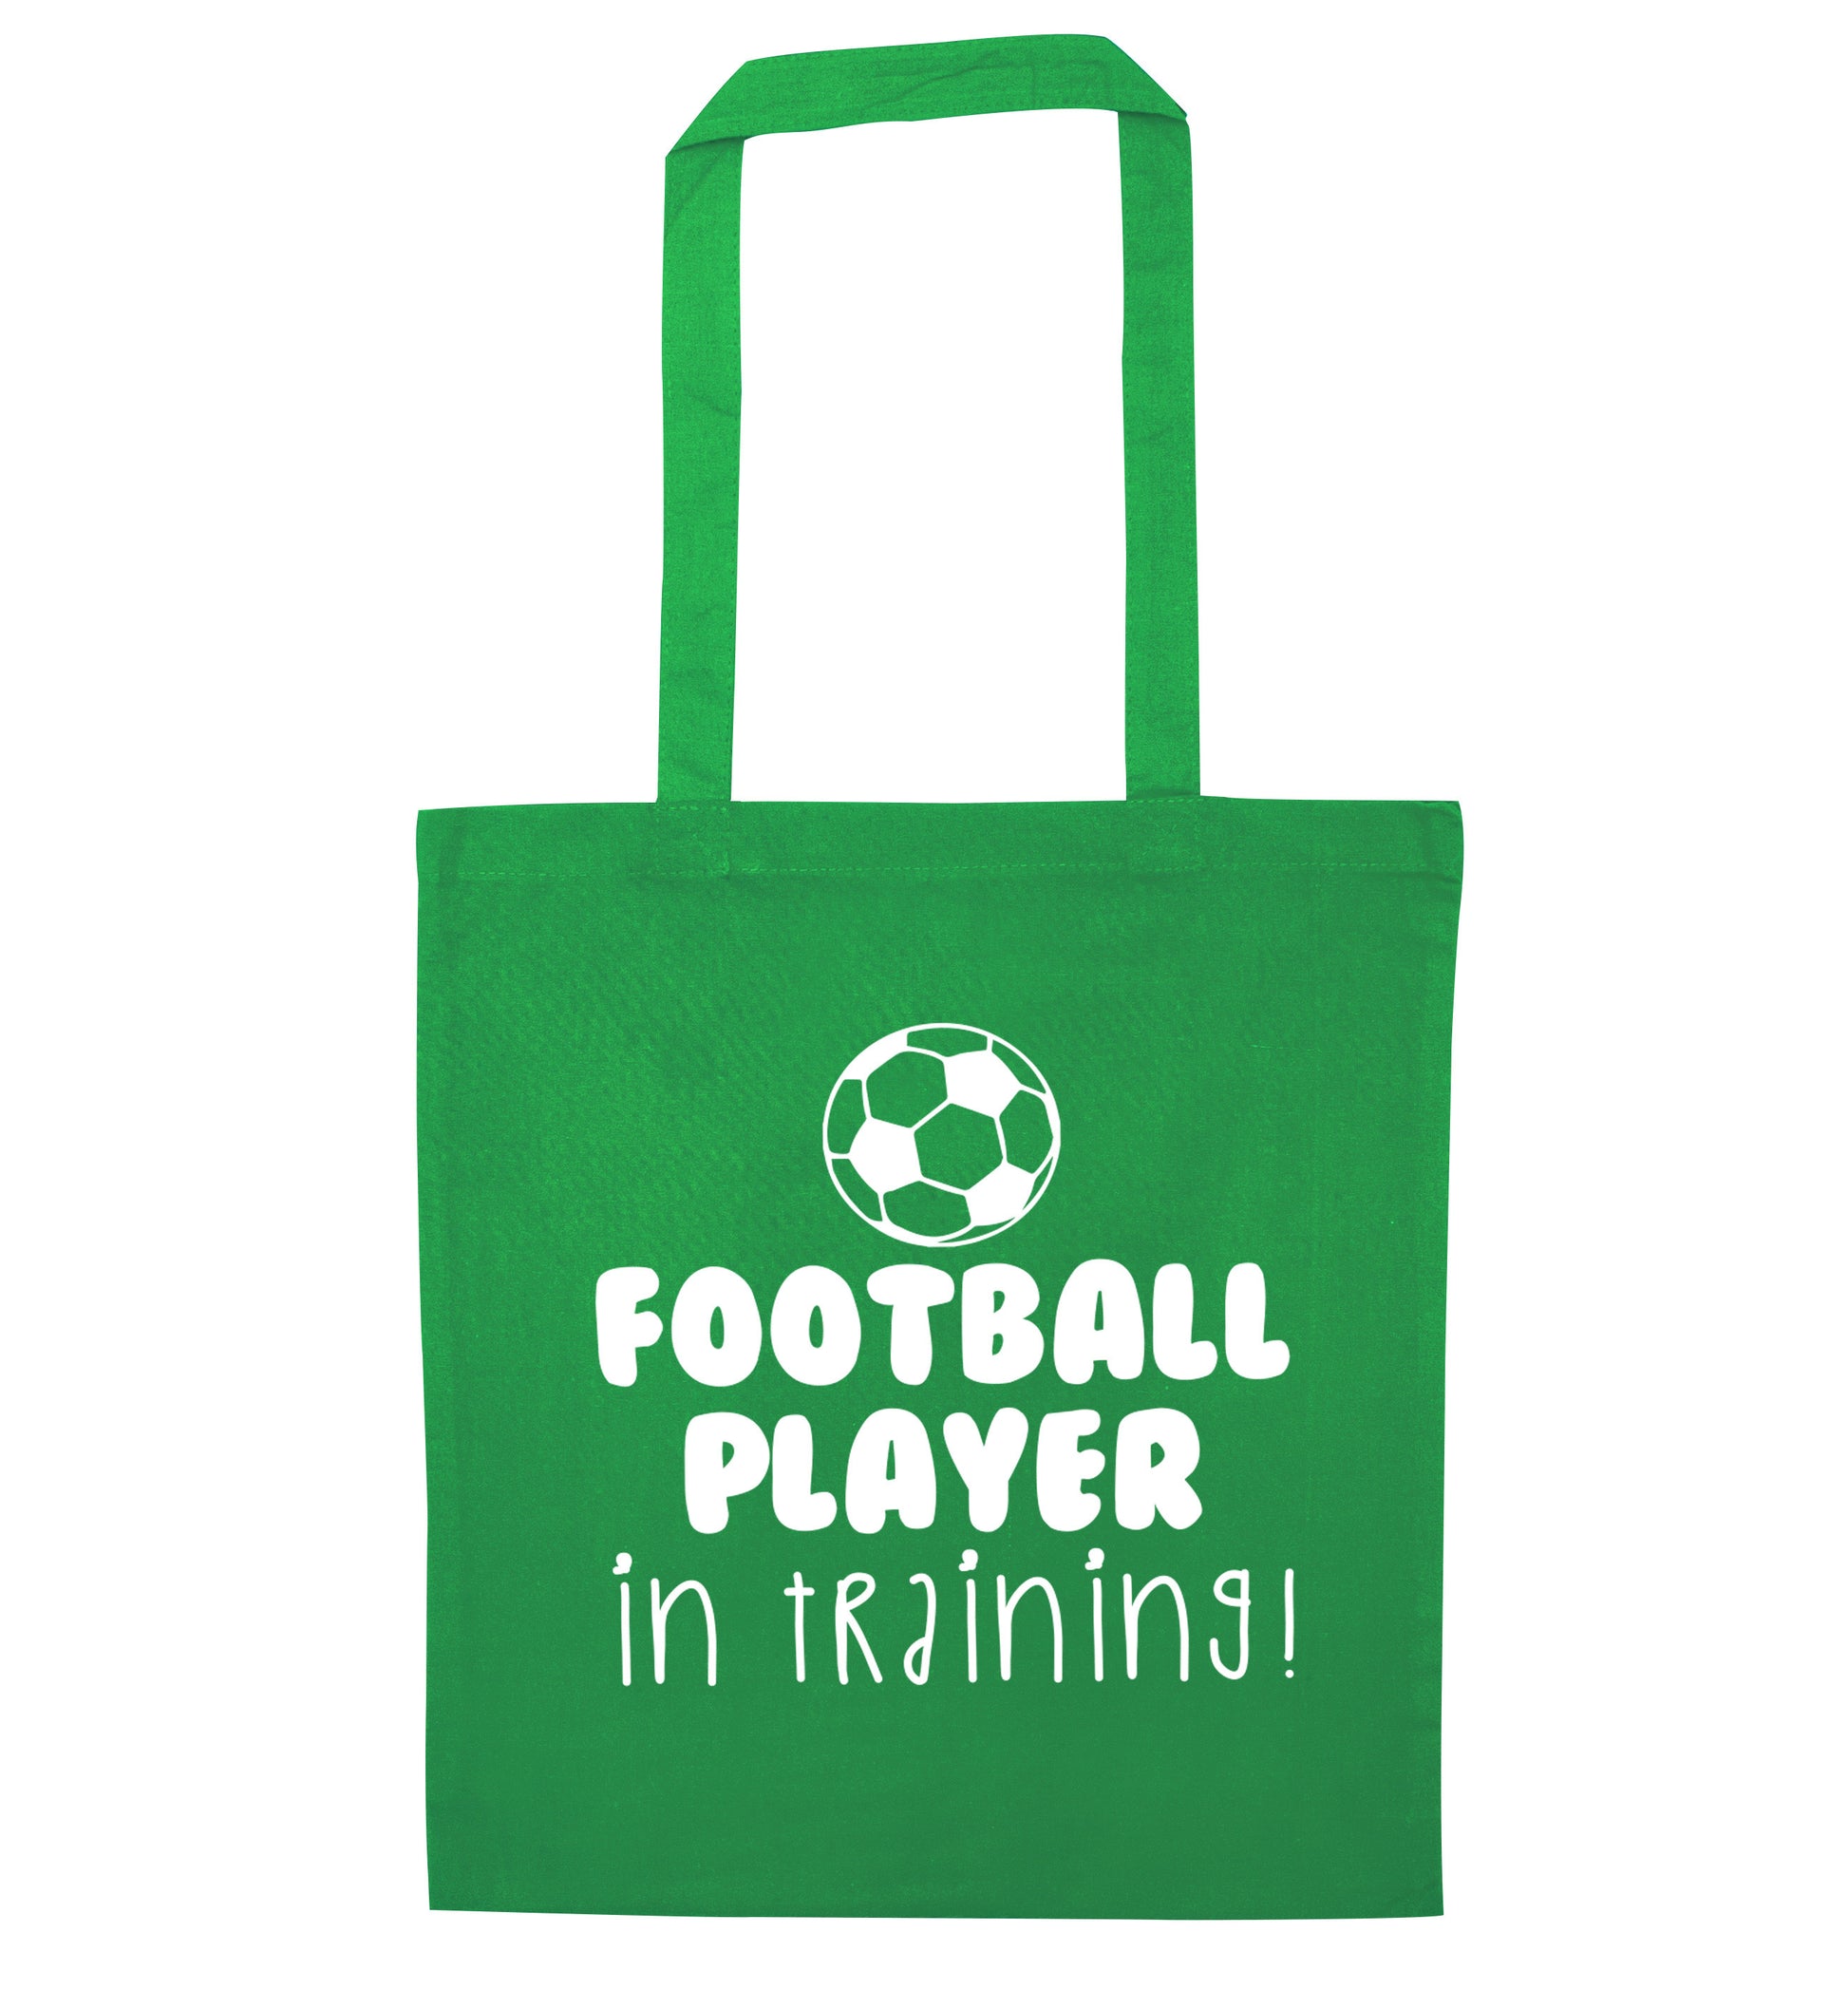 Football player in training green tote bag